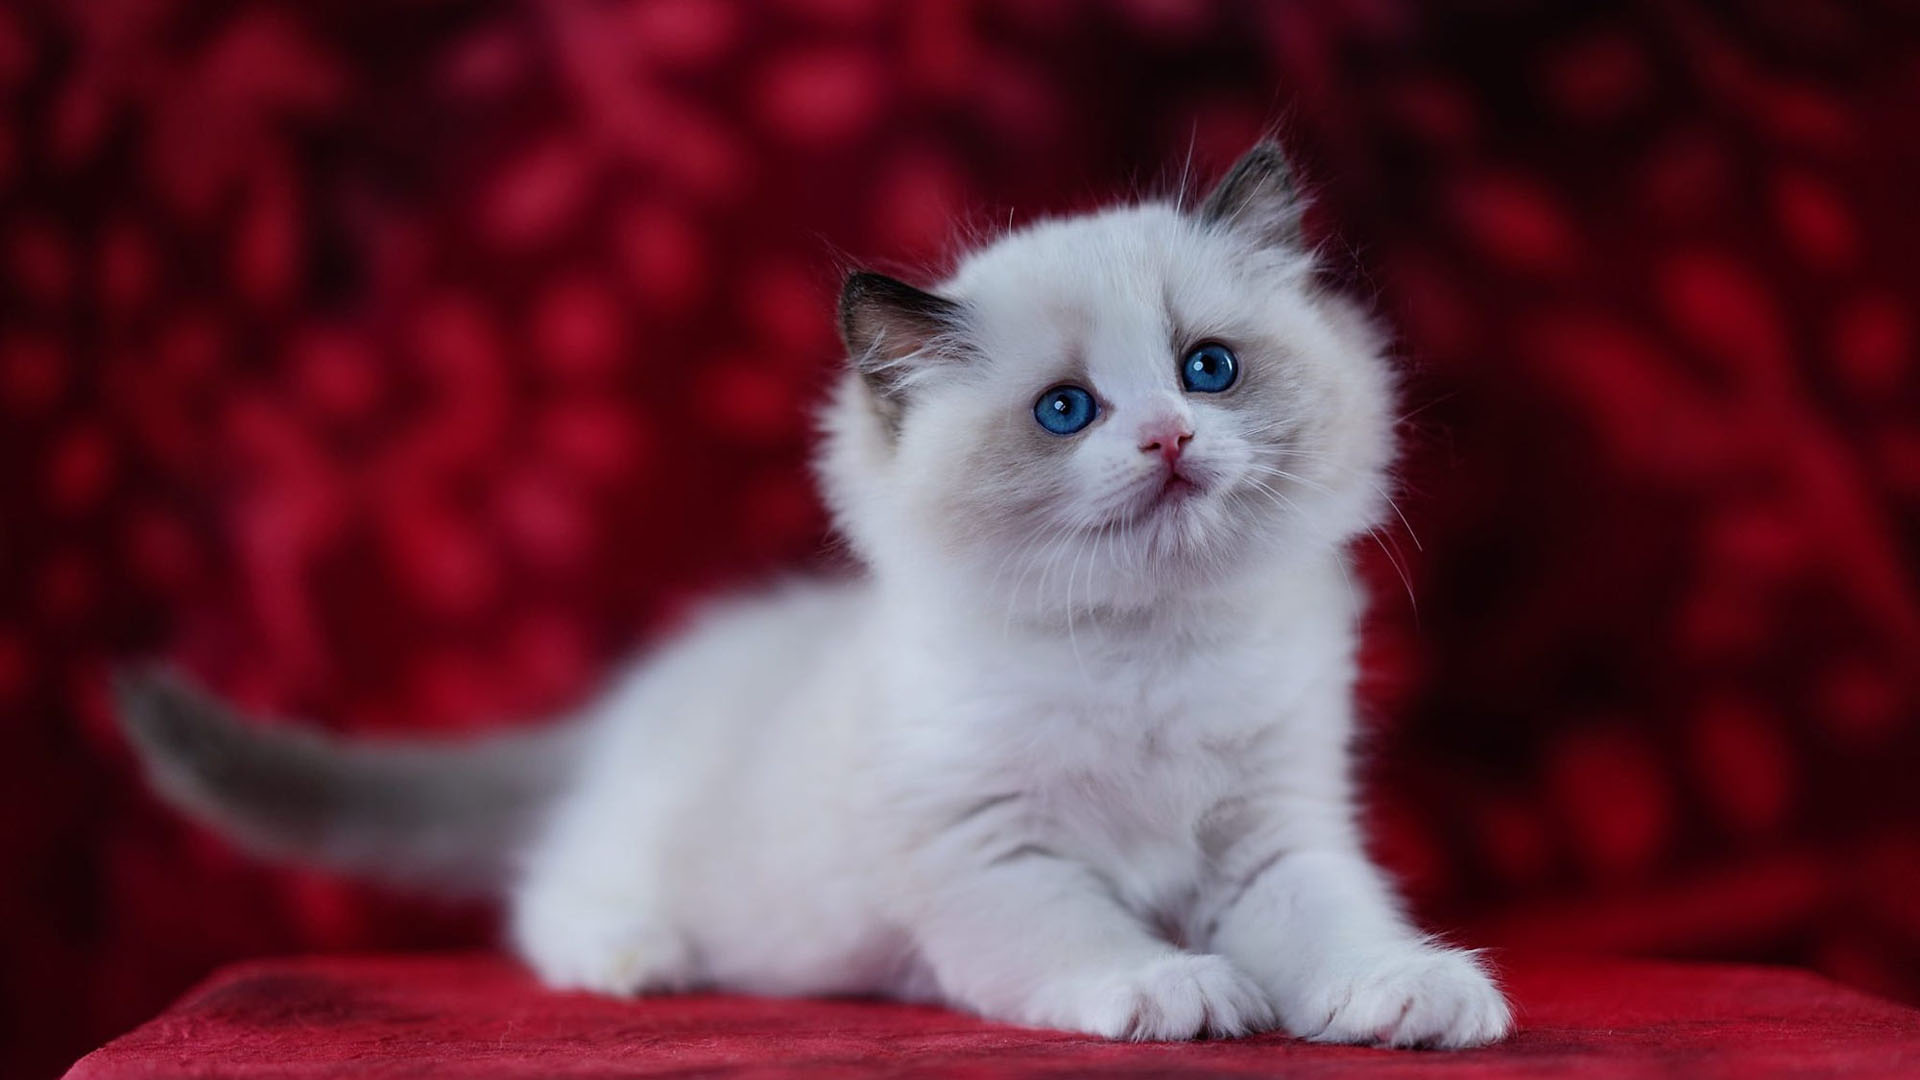 Blue Eyes White Fur Cat Kitten Is Sitting On Red Cloth Table 2K Cat